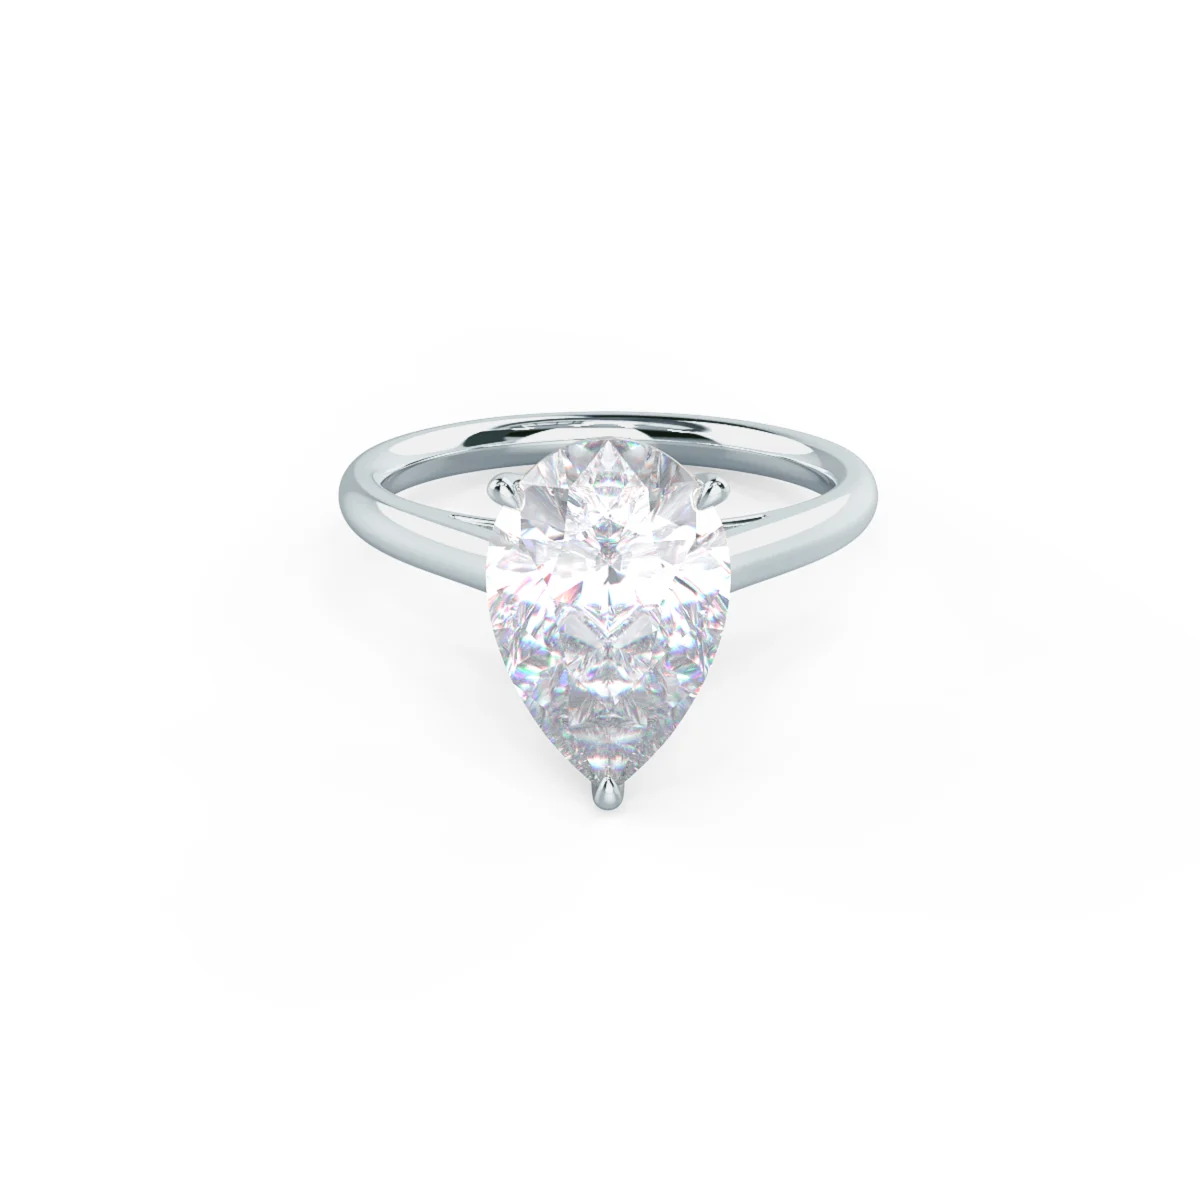 Pear Shaped Solitaire Engagement Ring